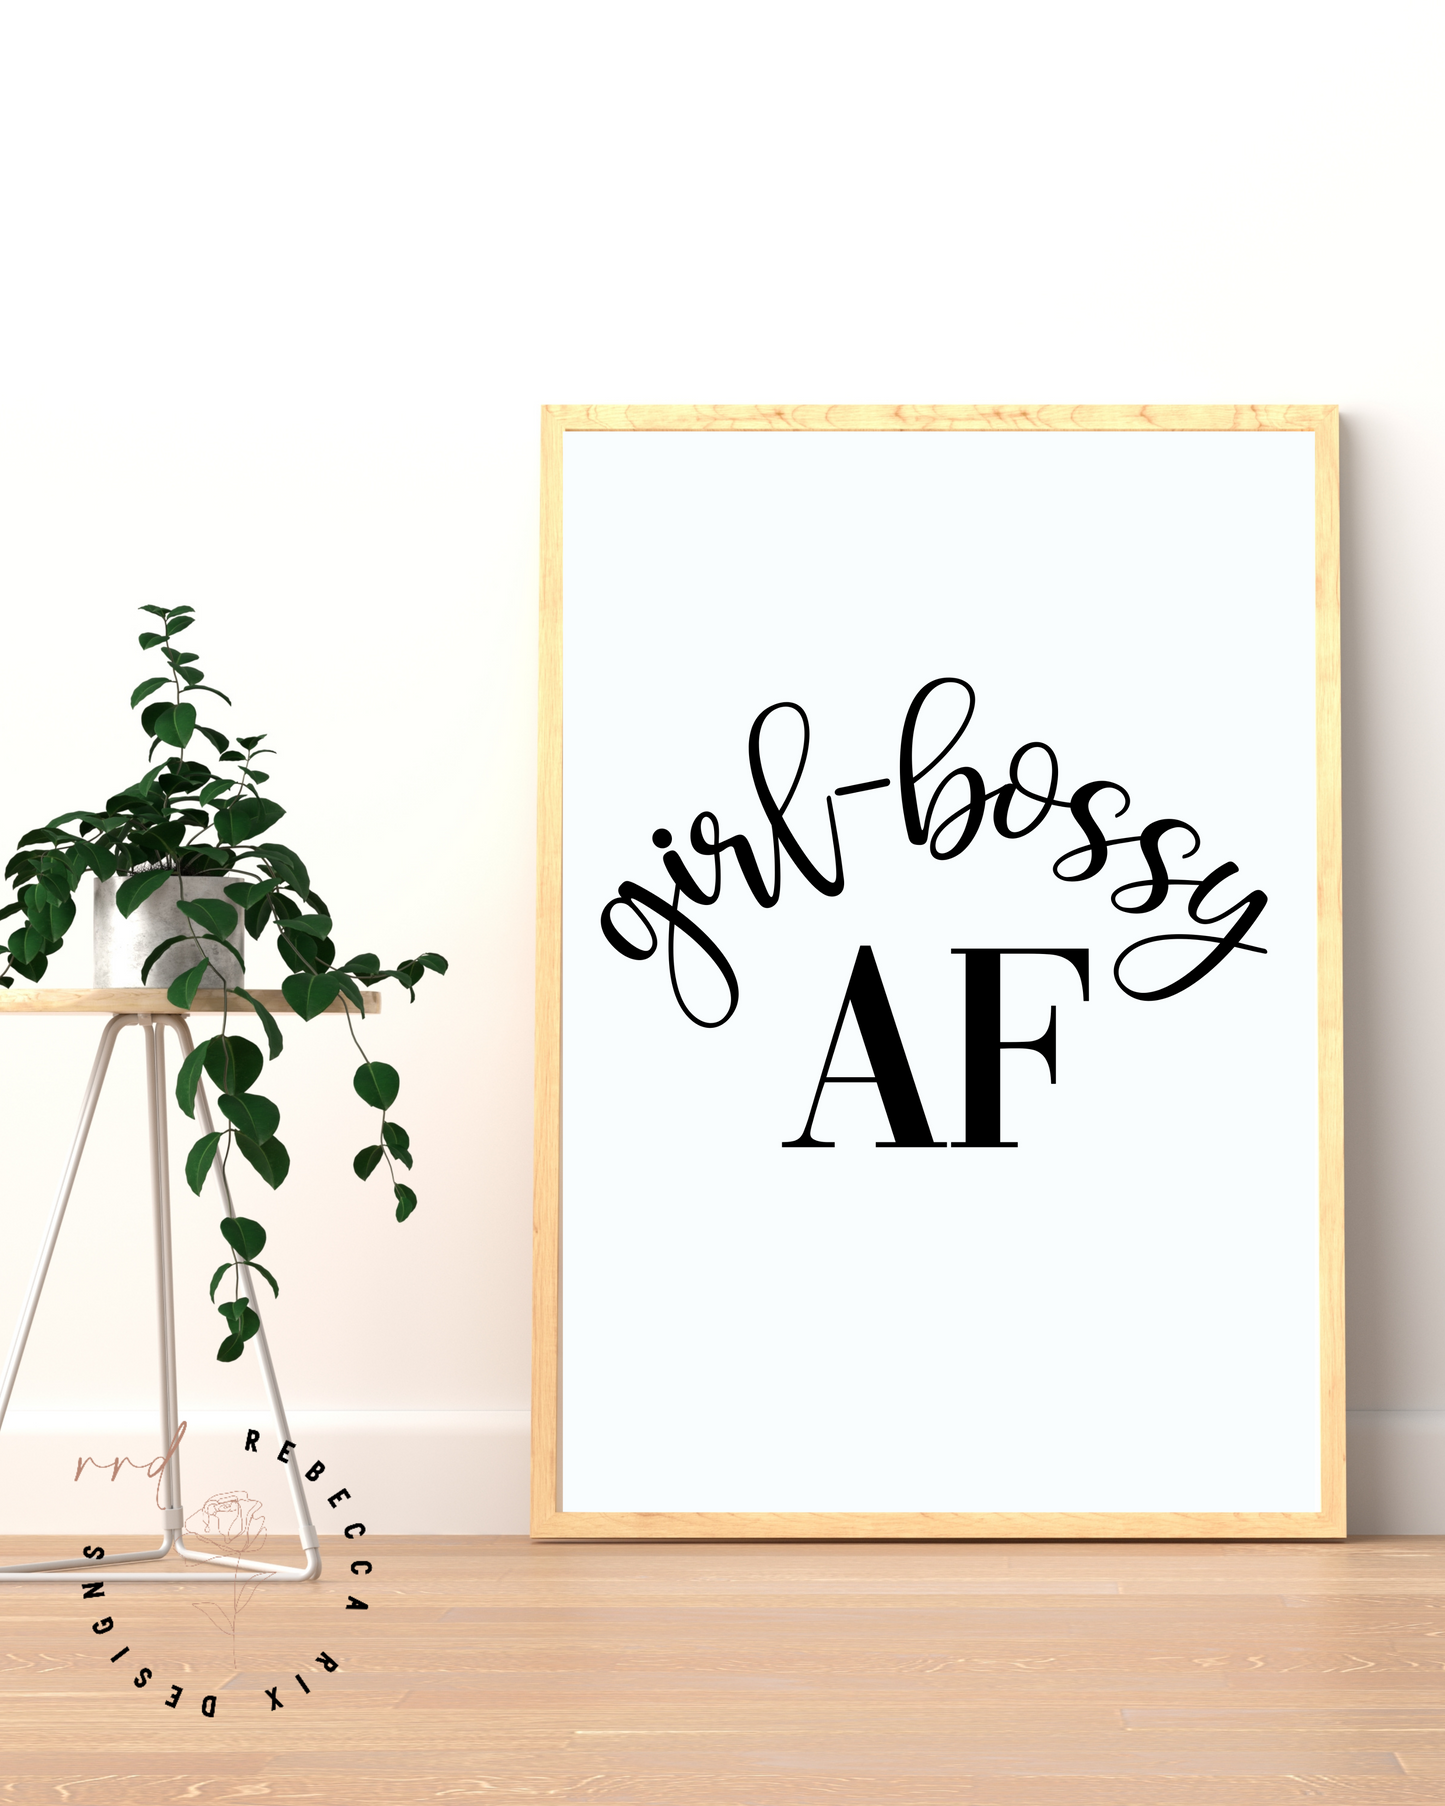 "Girl-Bossy AF" Girl Boss Quote, Printable Art